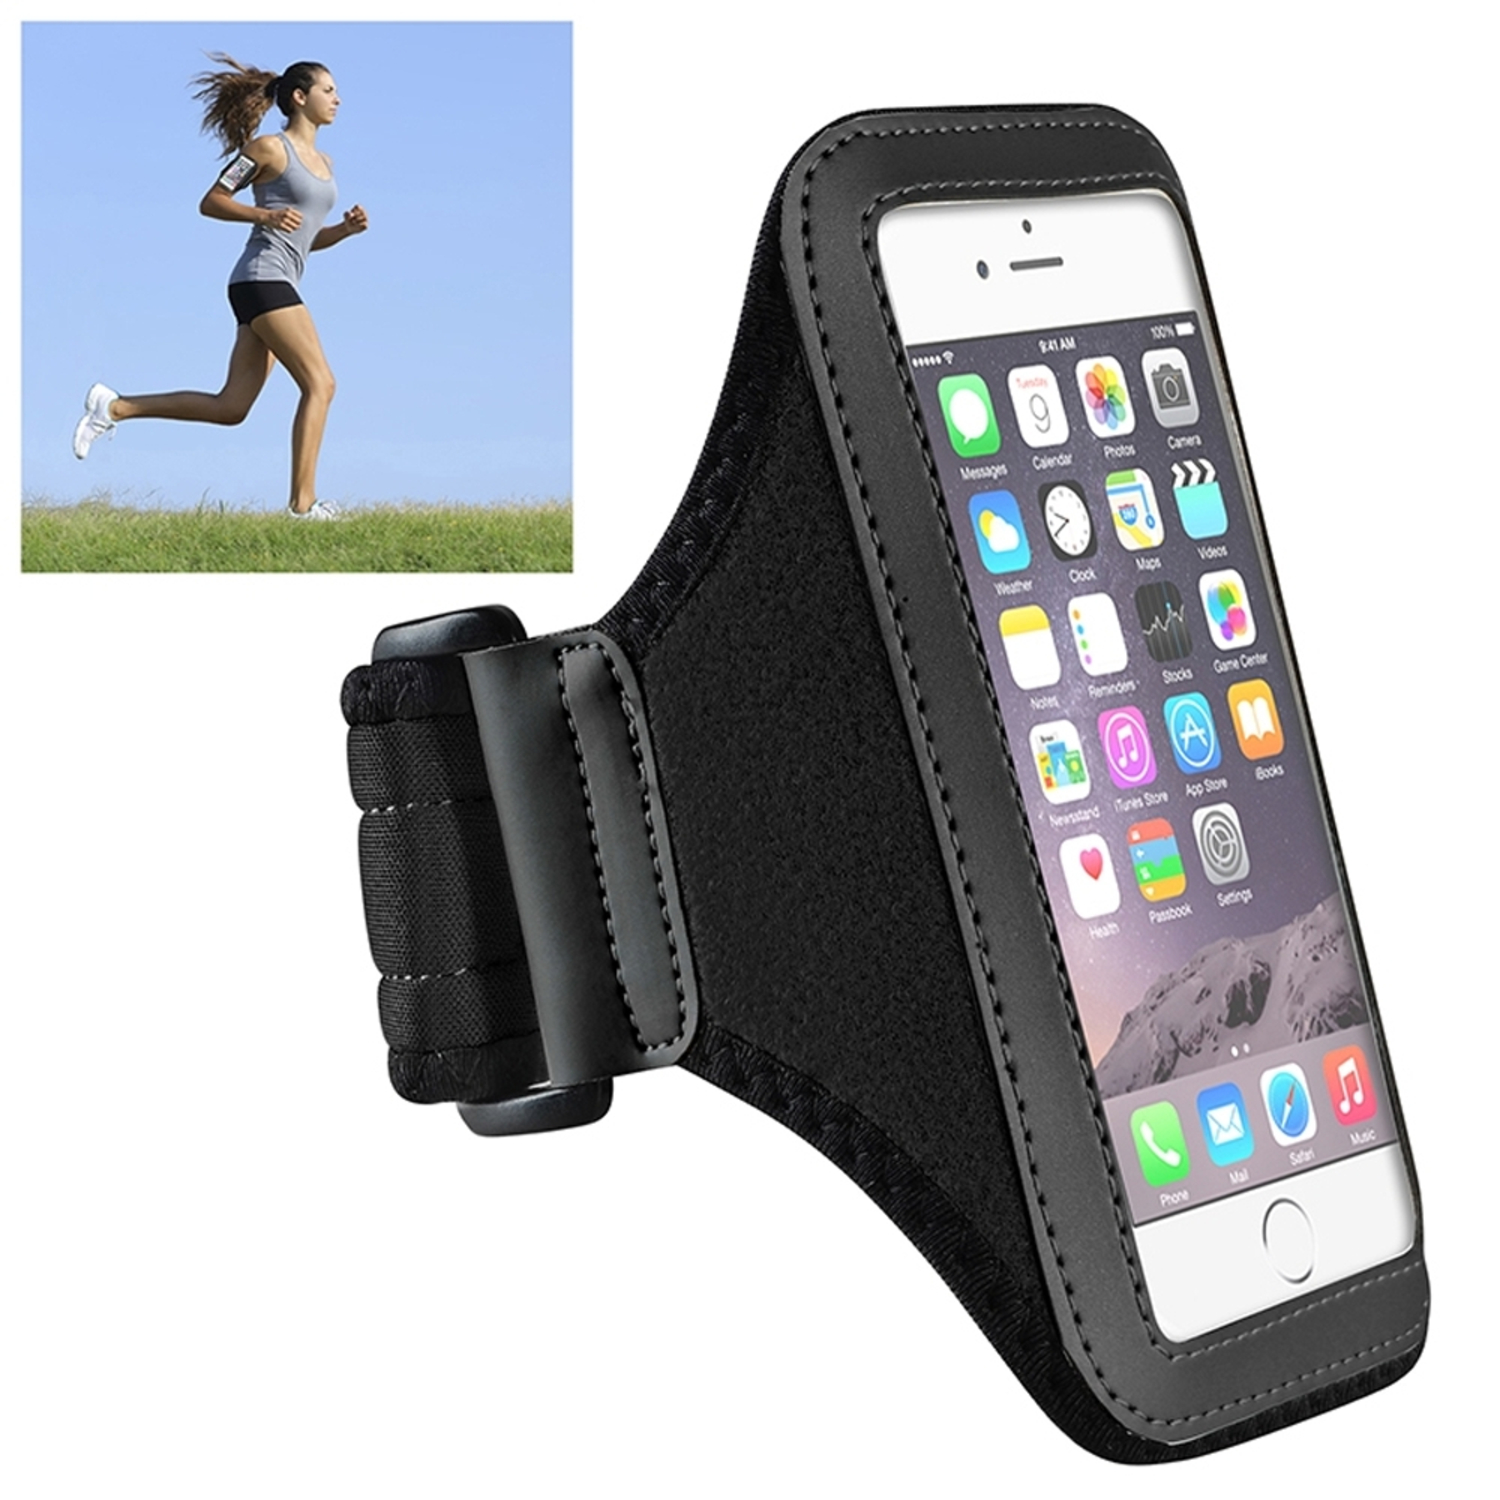 Insten Universal Workout Running Sports Exercise Gym Armband Case For iPhone 6 6S Samsung Galaxy S6 S6 Edge, Black